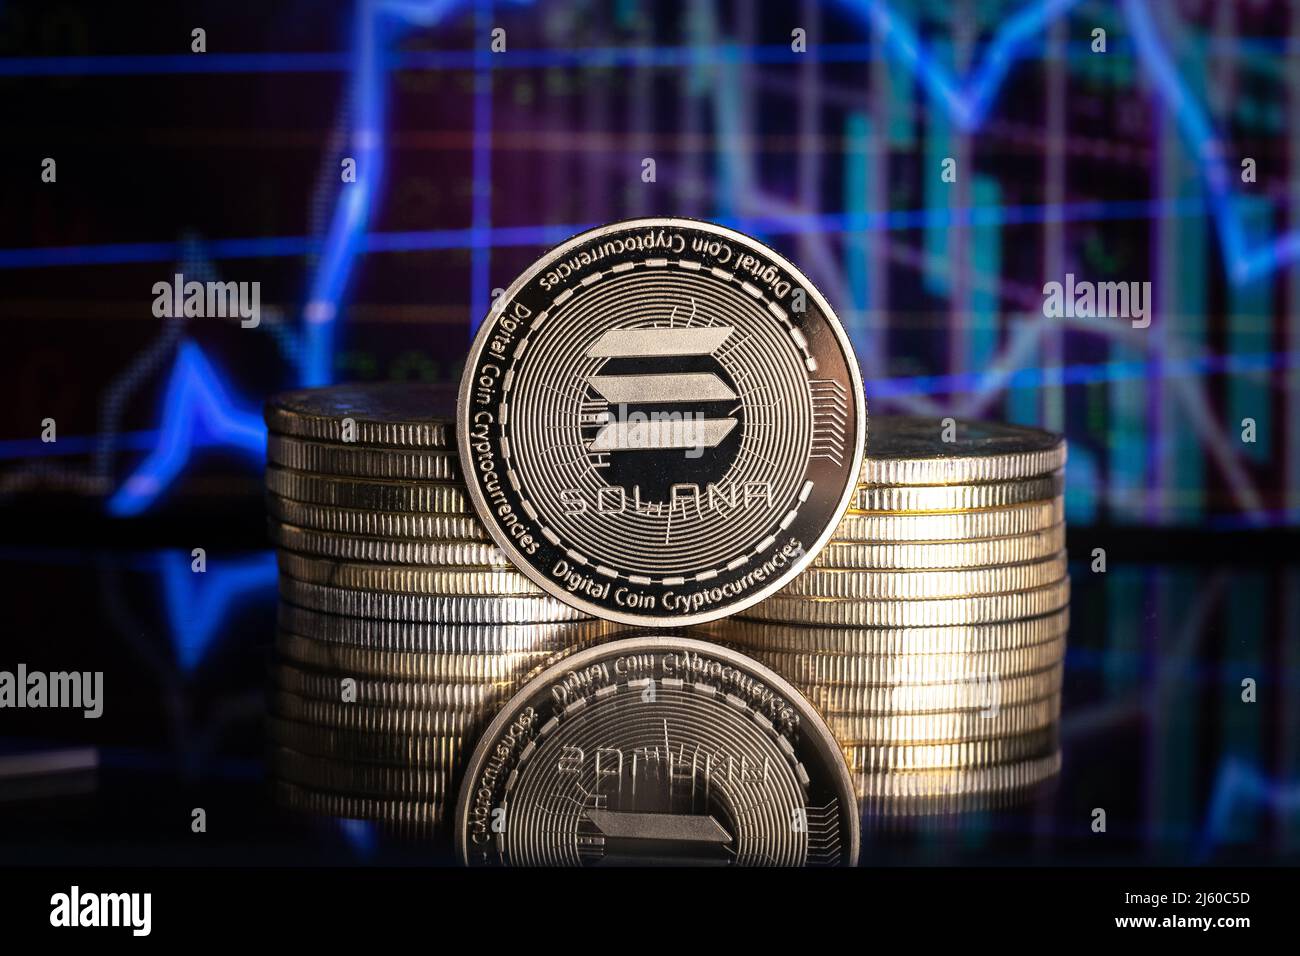 Solana SOL cryptocurrency physical coin and blurry price charts. Stock Photo